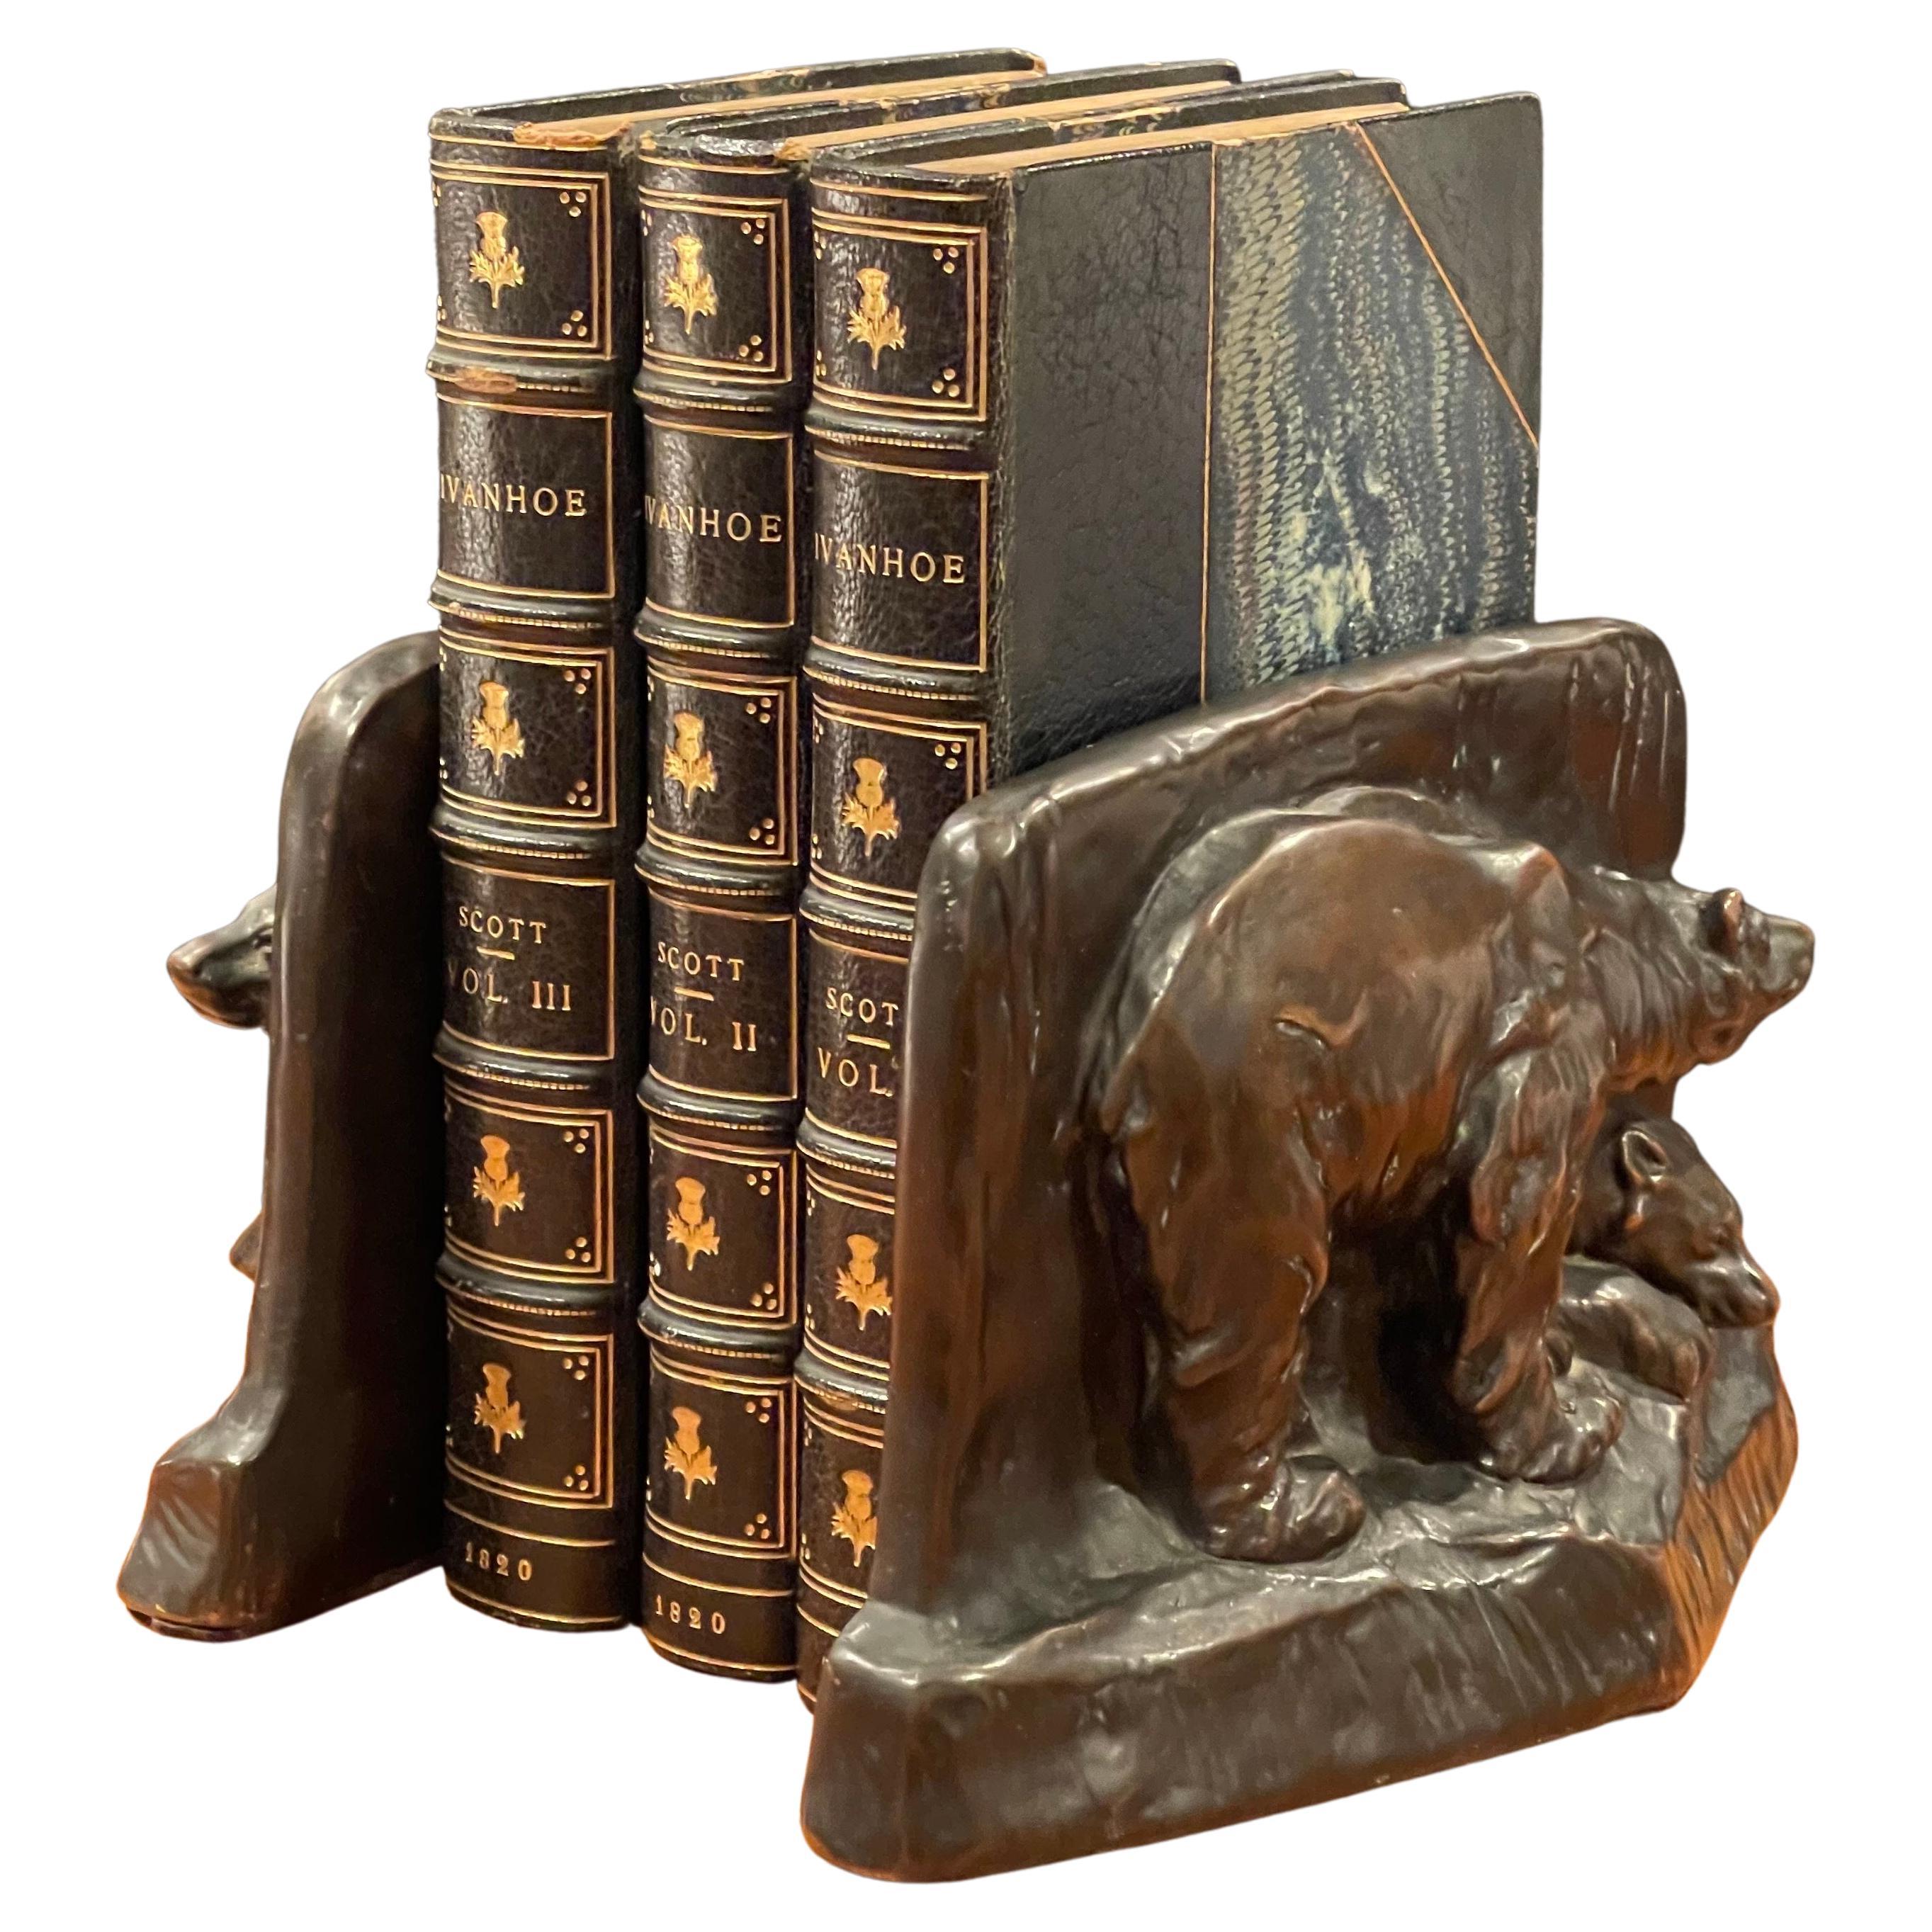 Vintage pair of bronze clad grizzly bear bookends, circa 1940s. They are in original condition with a fine patina, some light oxidation and some surface scratches; the pair measures 5